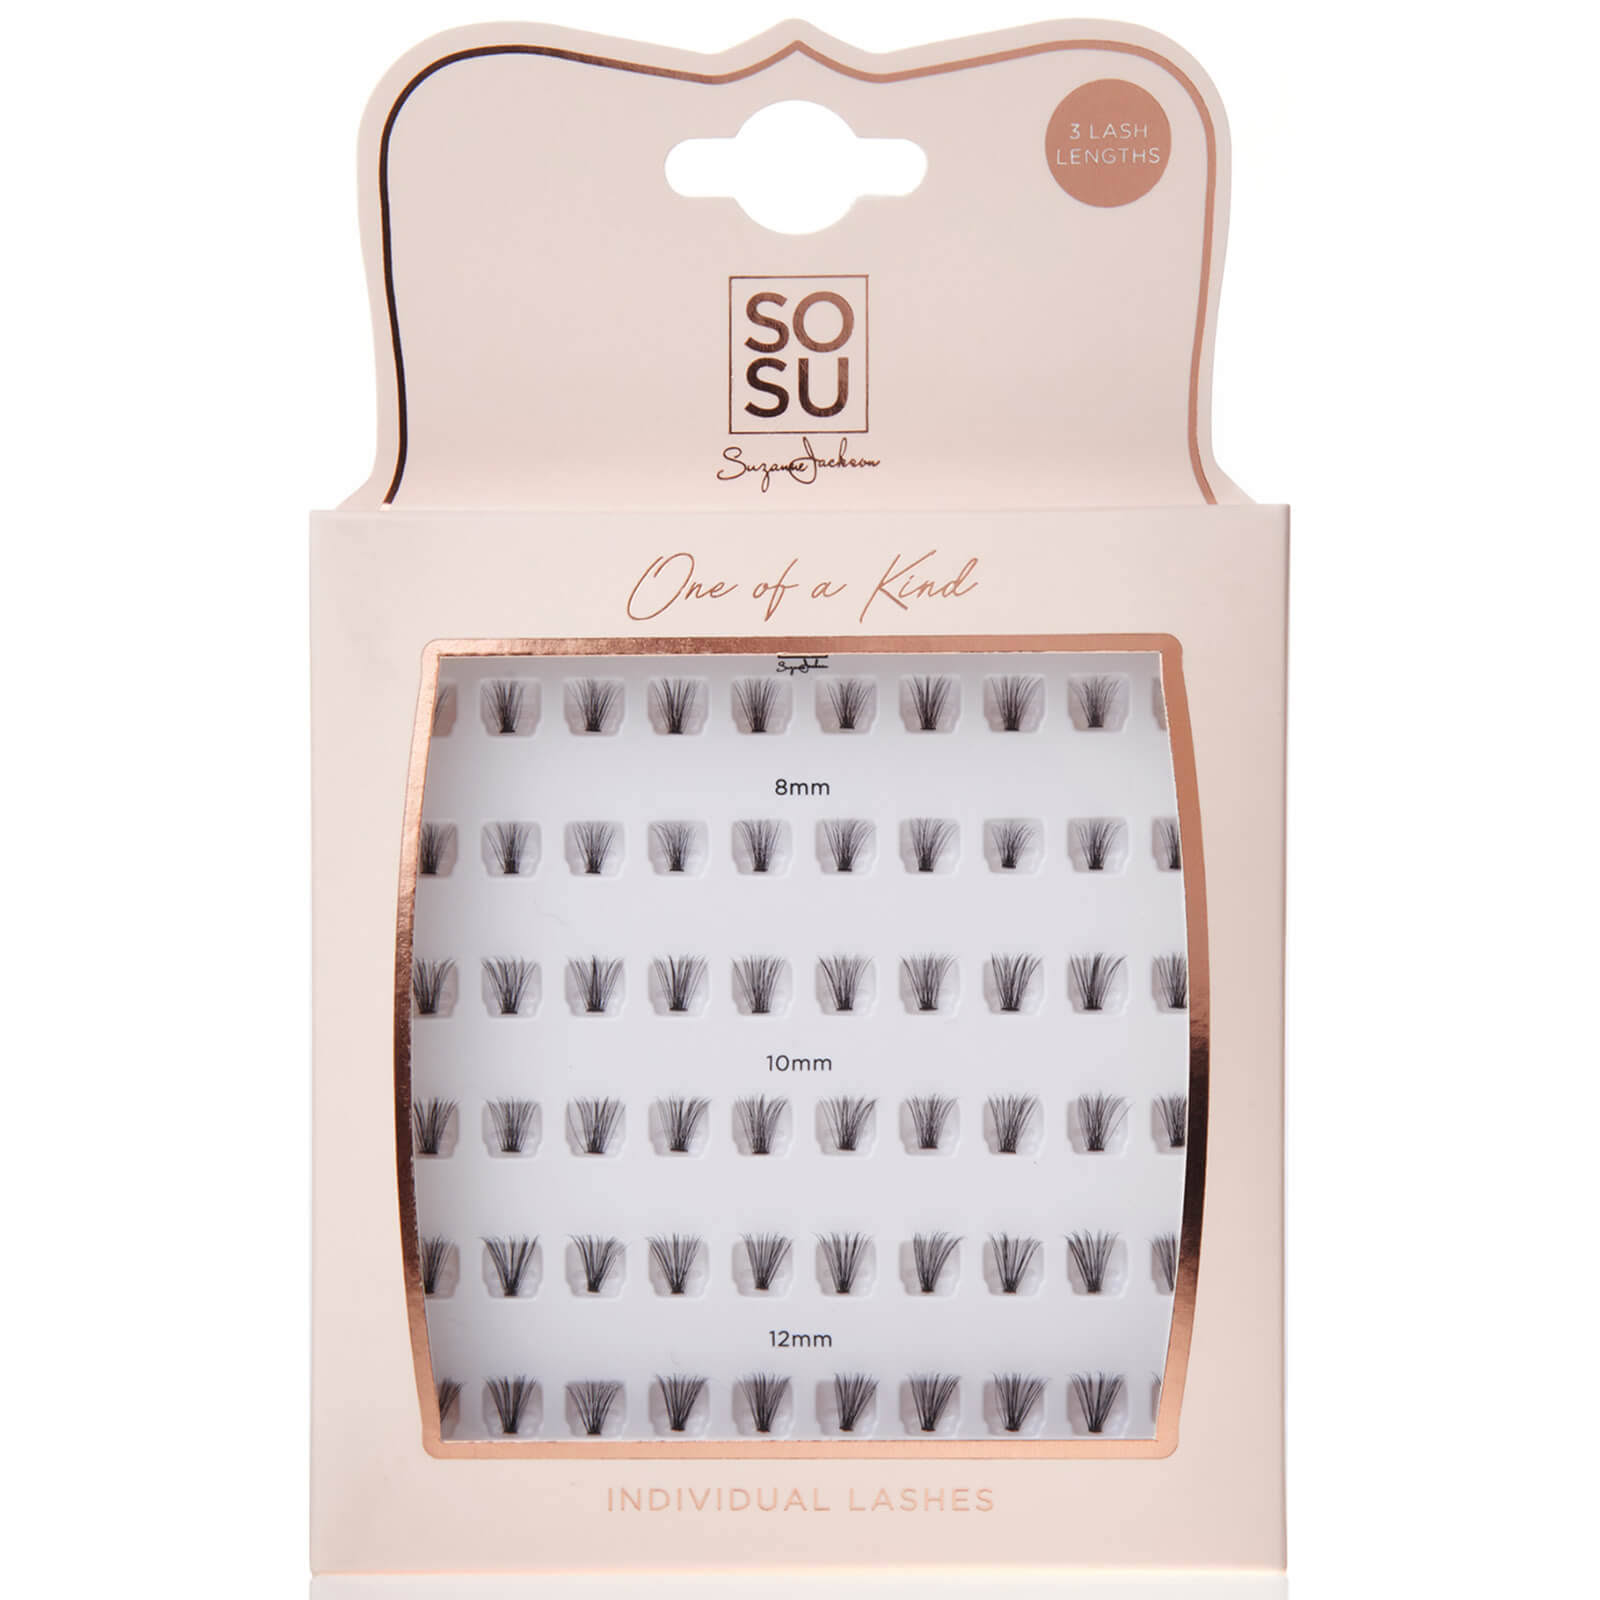 SOSU Individual Lashes - One of A Kind (8mm, 10mm And 12mm)